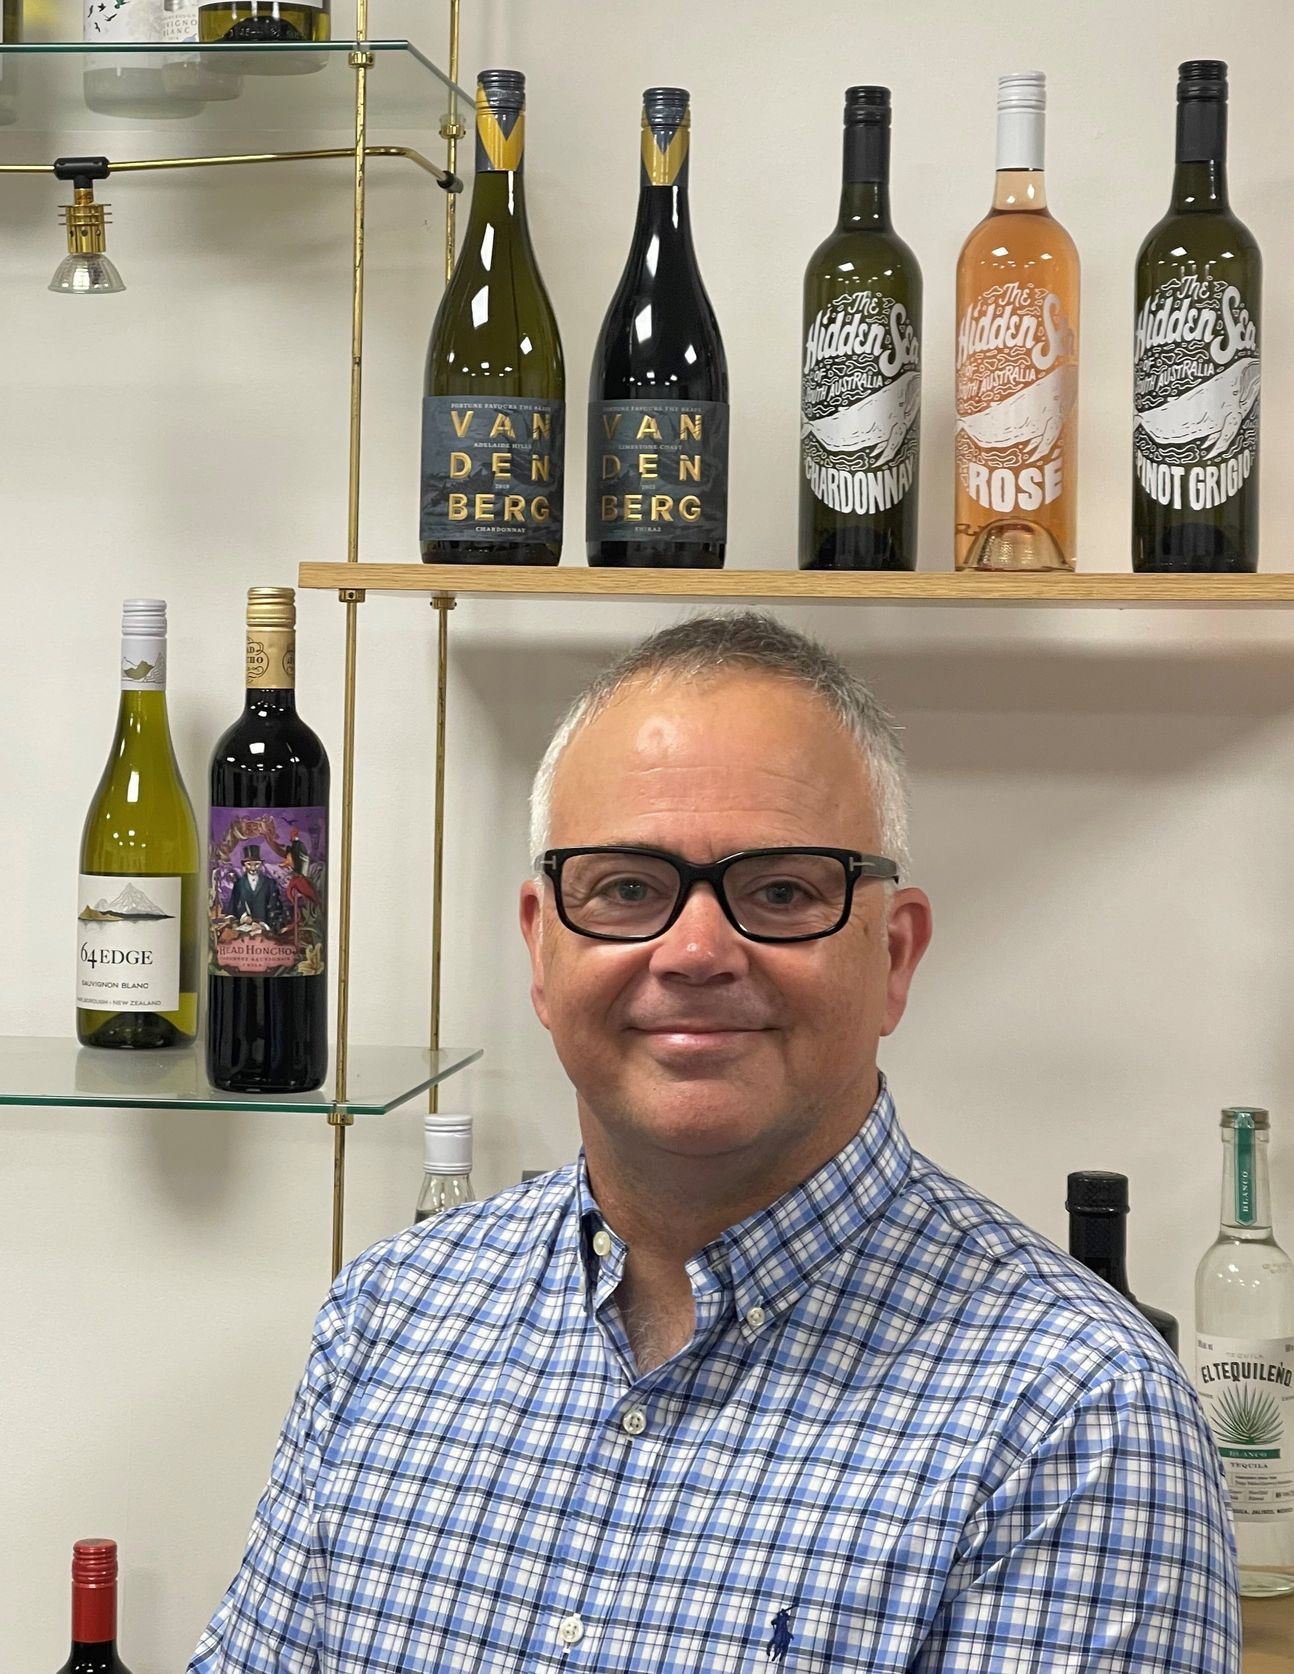 Kingsland Drinks strengthens leadership team with new role of operations director